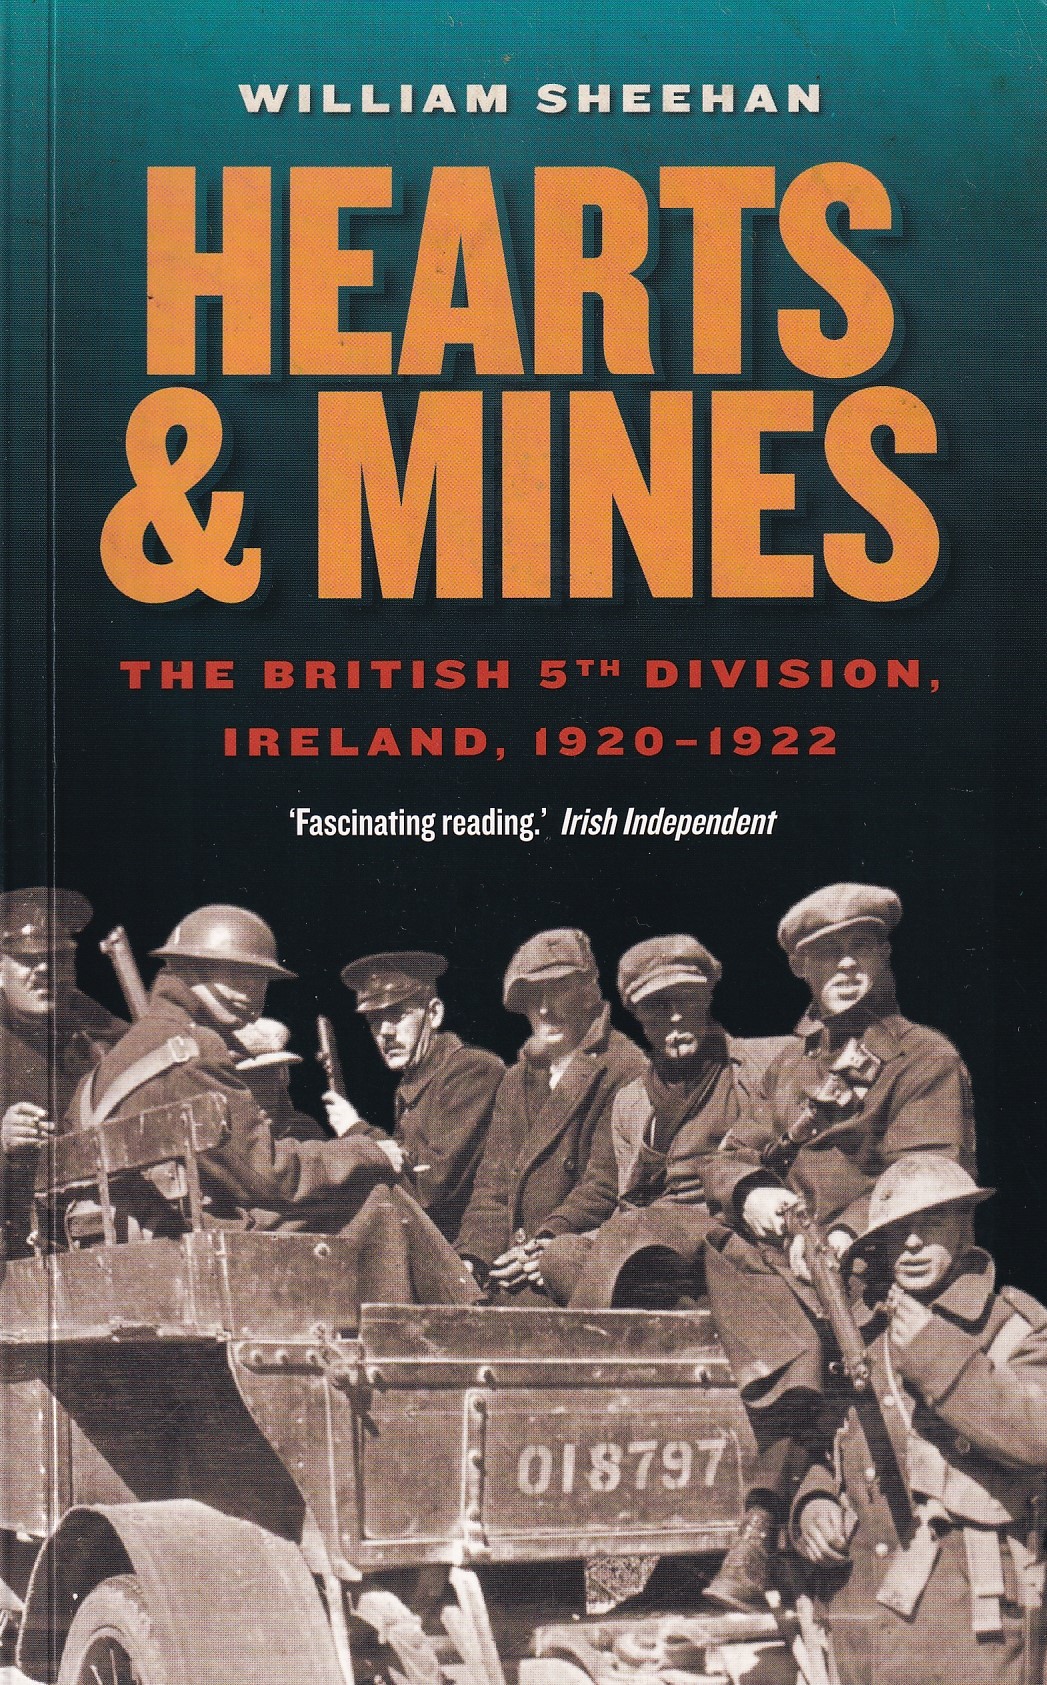 Hearts and Mines: The British 5th Division, Ireland, 1920-1922 | William Sheehan | Charlie Byrne's